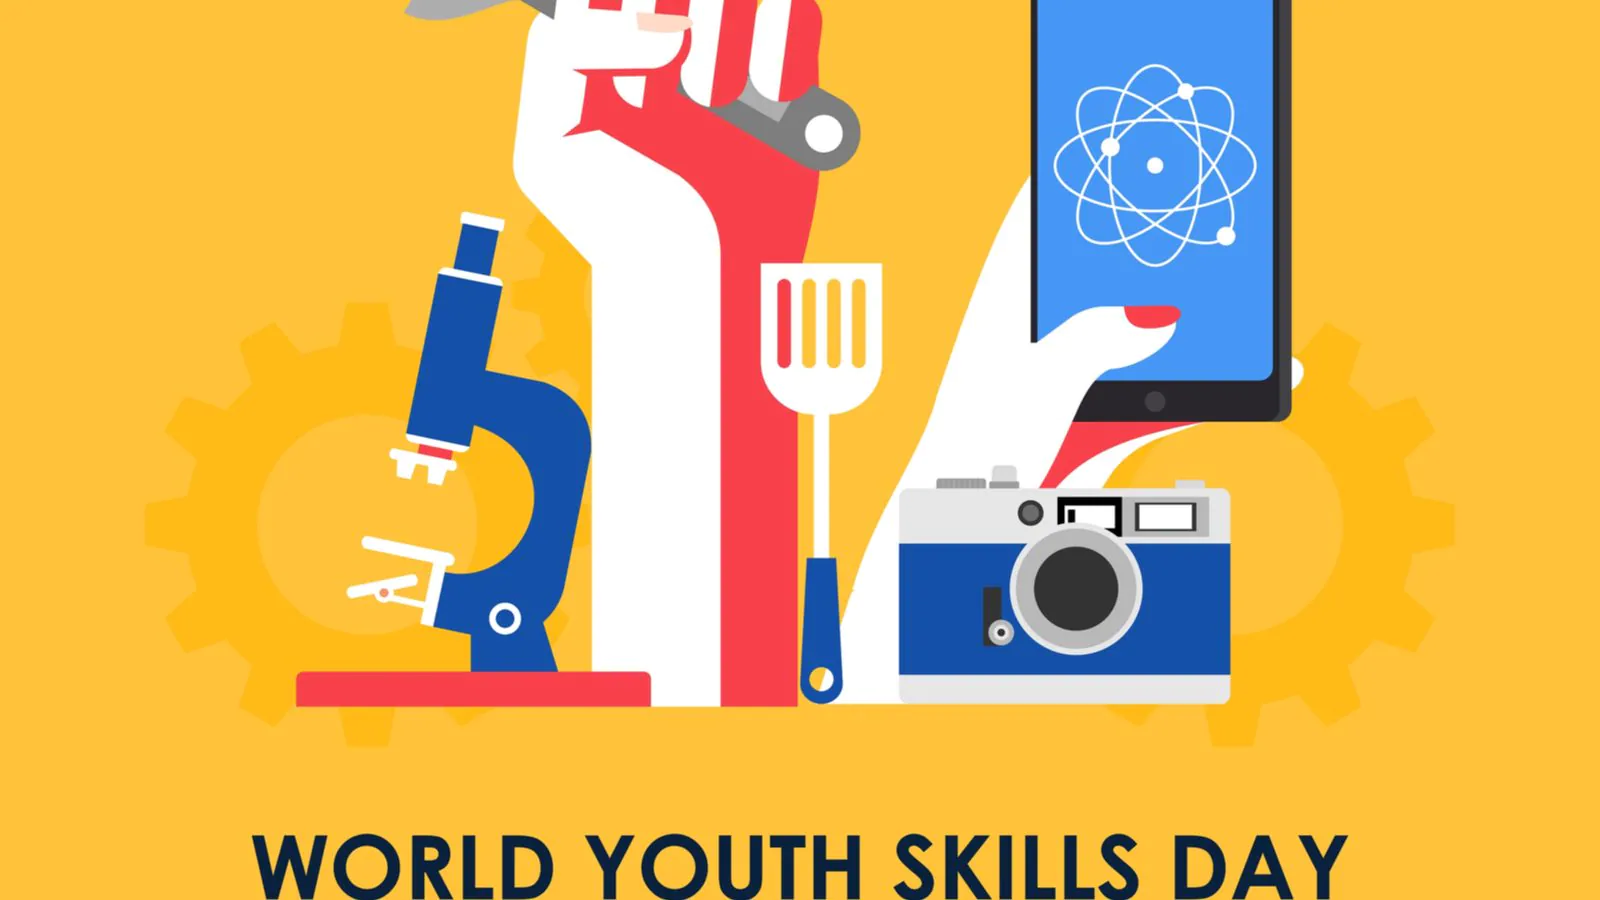 World Youth Skills Day 2022: Theme, History and Significance